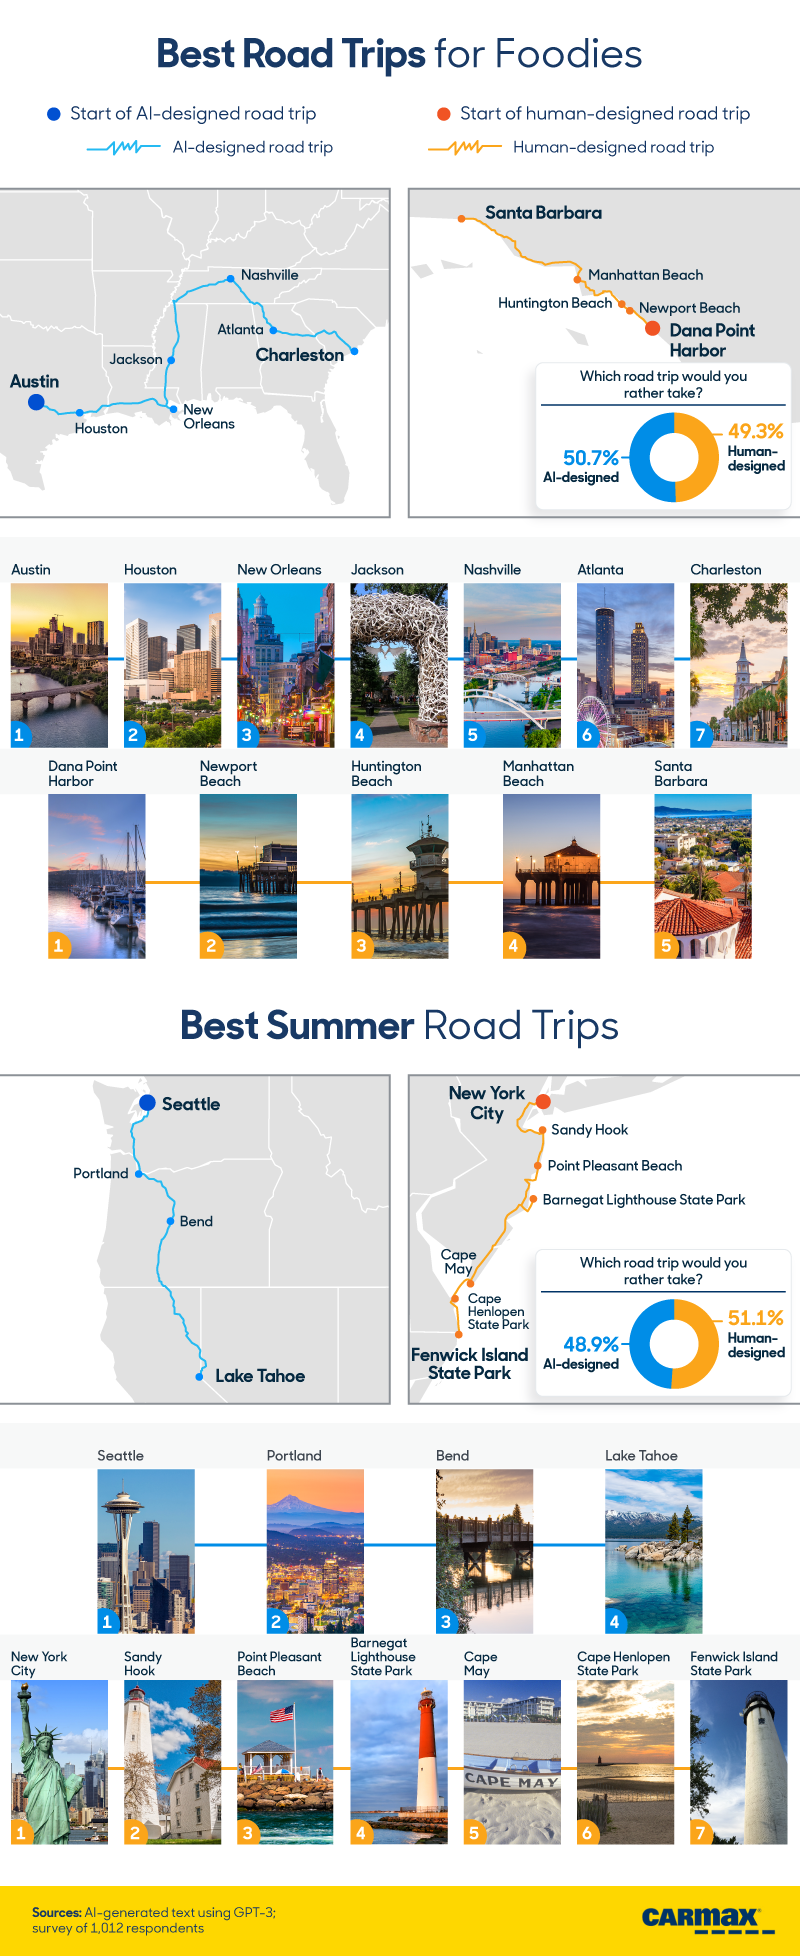 AI Plans a Road Trip: Best Road Trips for Foodies | CarMax